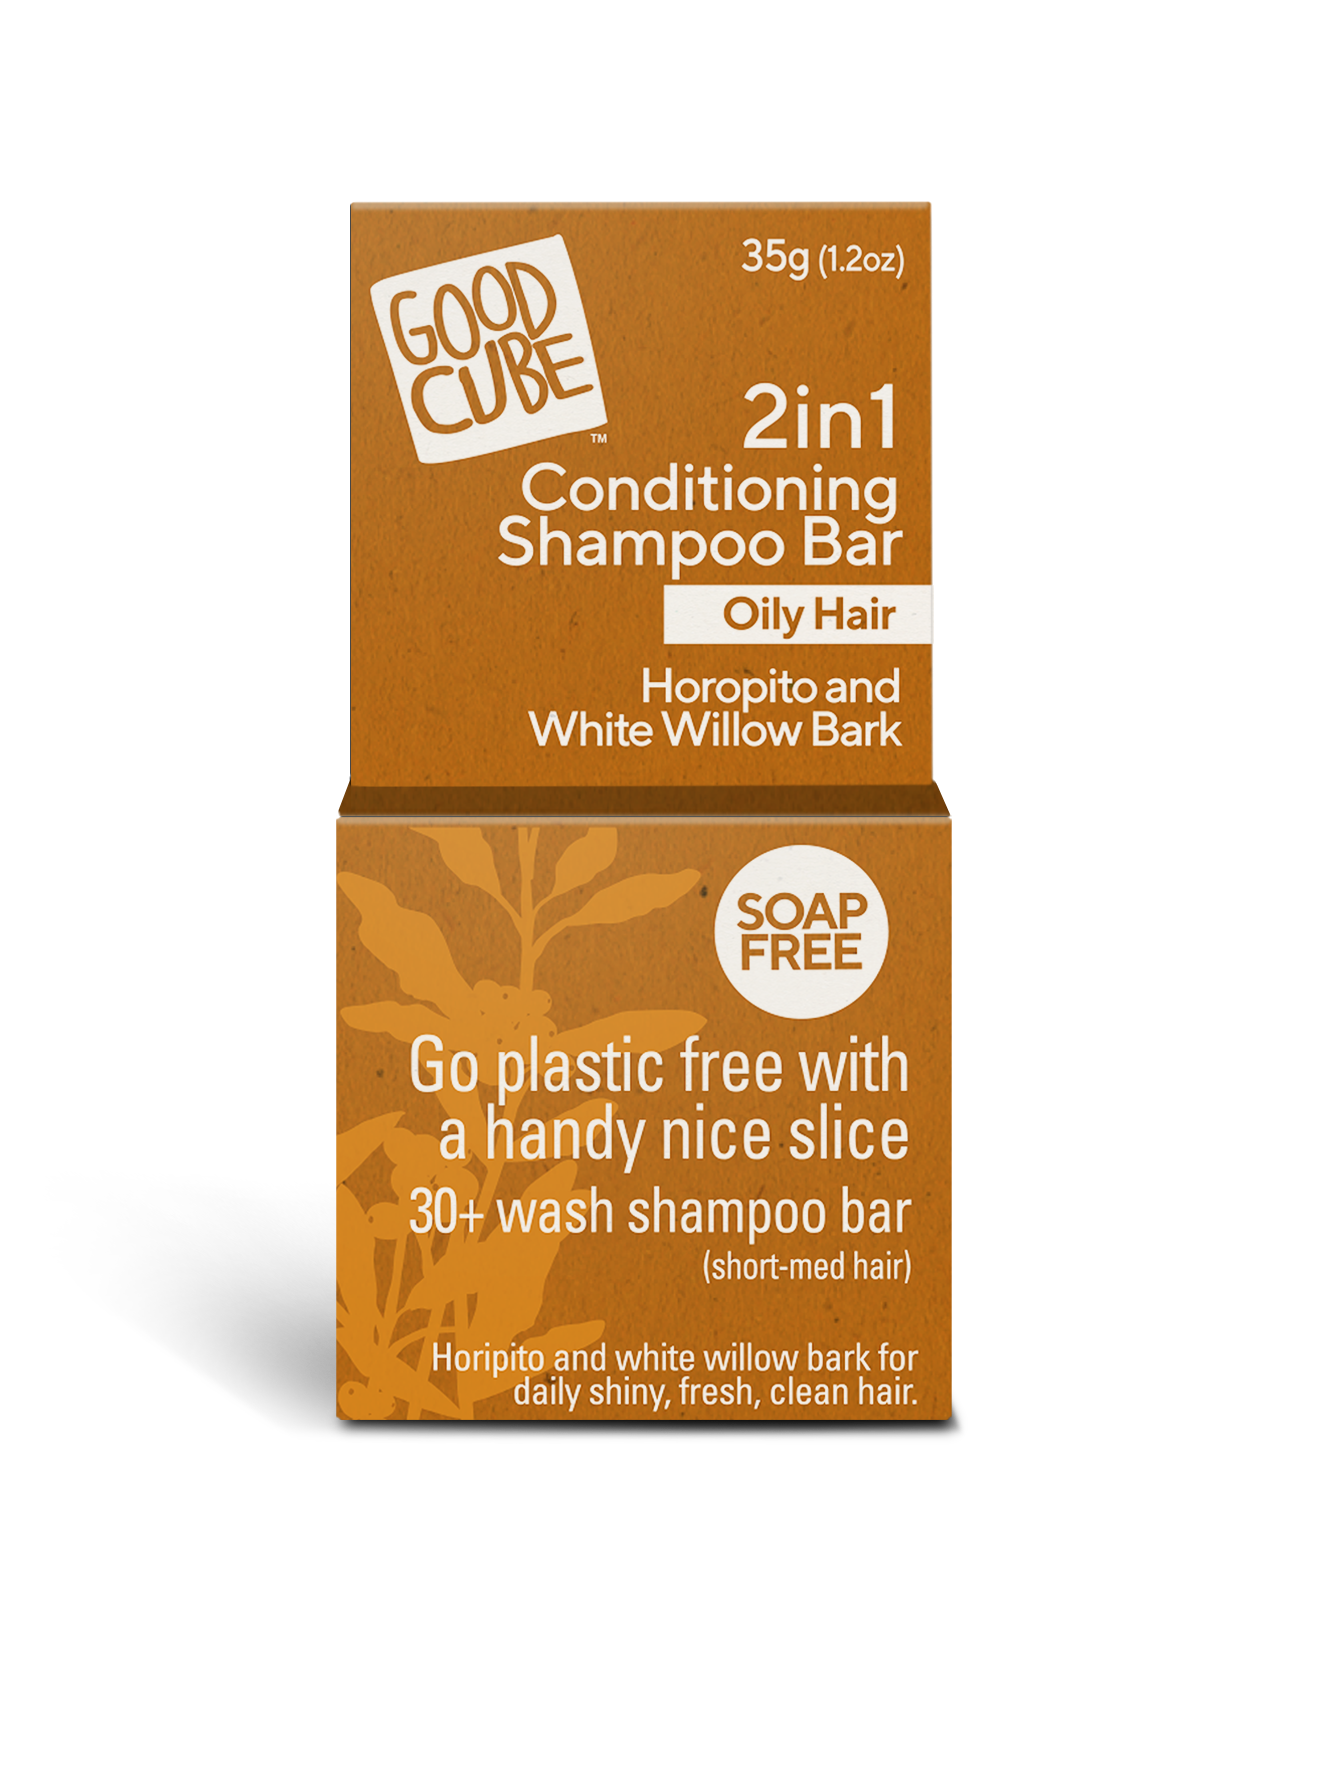 GOOD CUBE 2 in 1 Conditioning Shampoo - Oily 35g